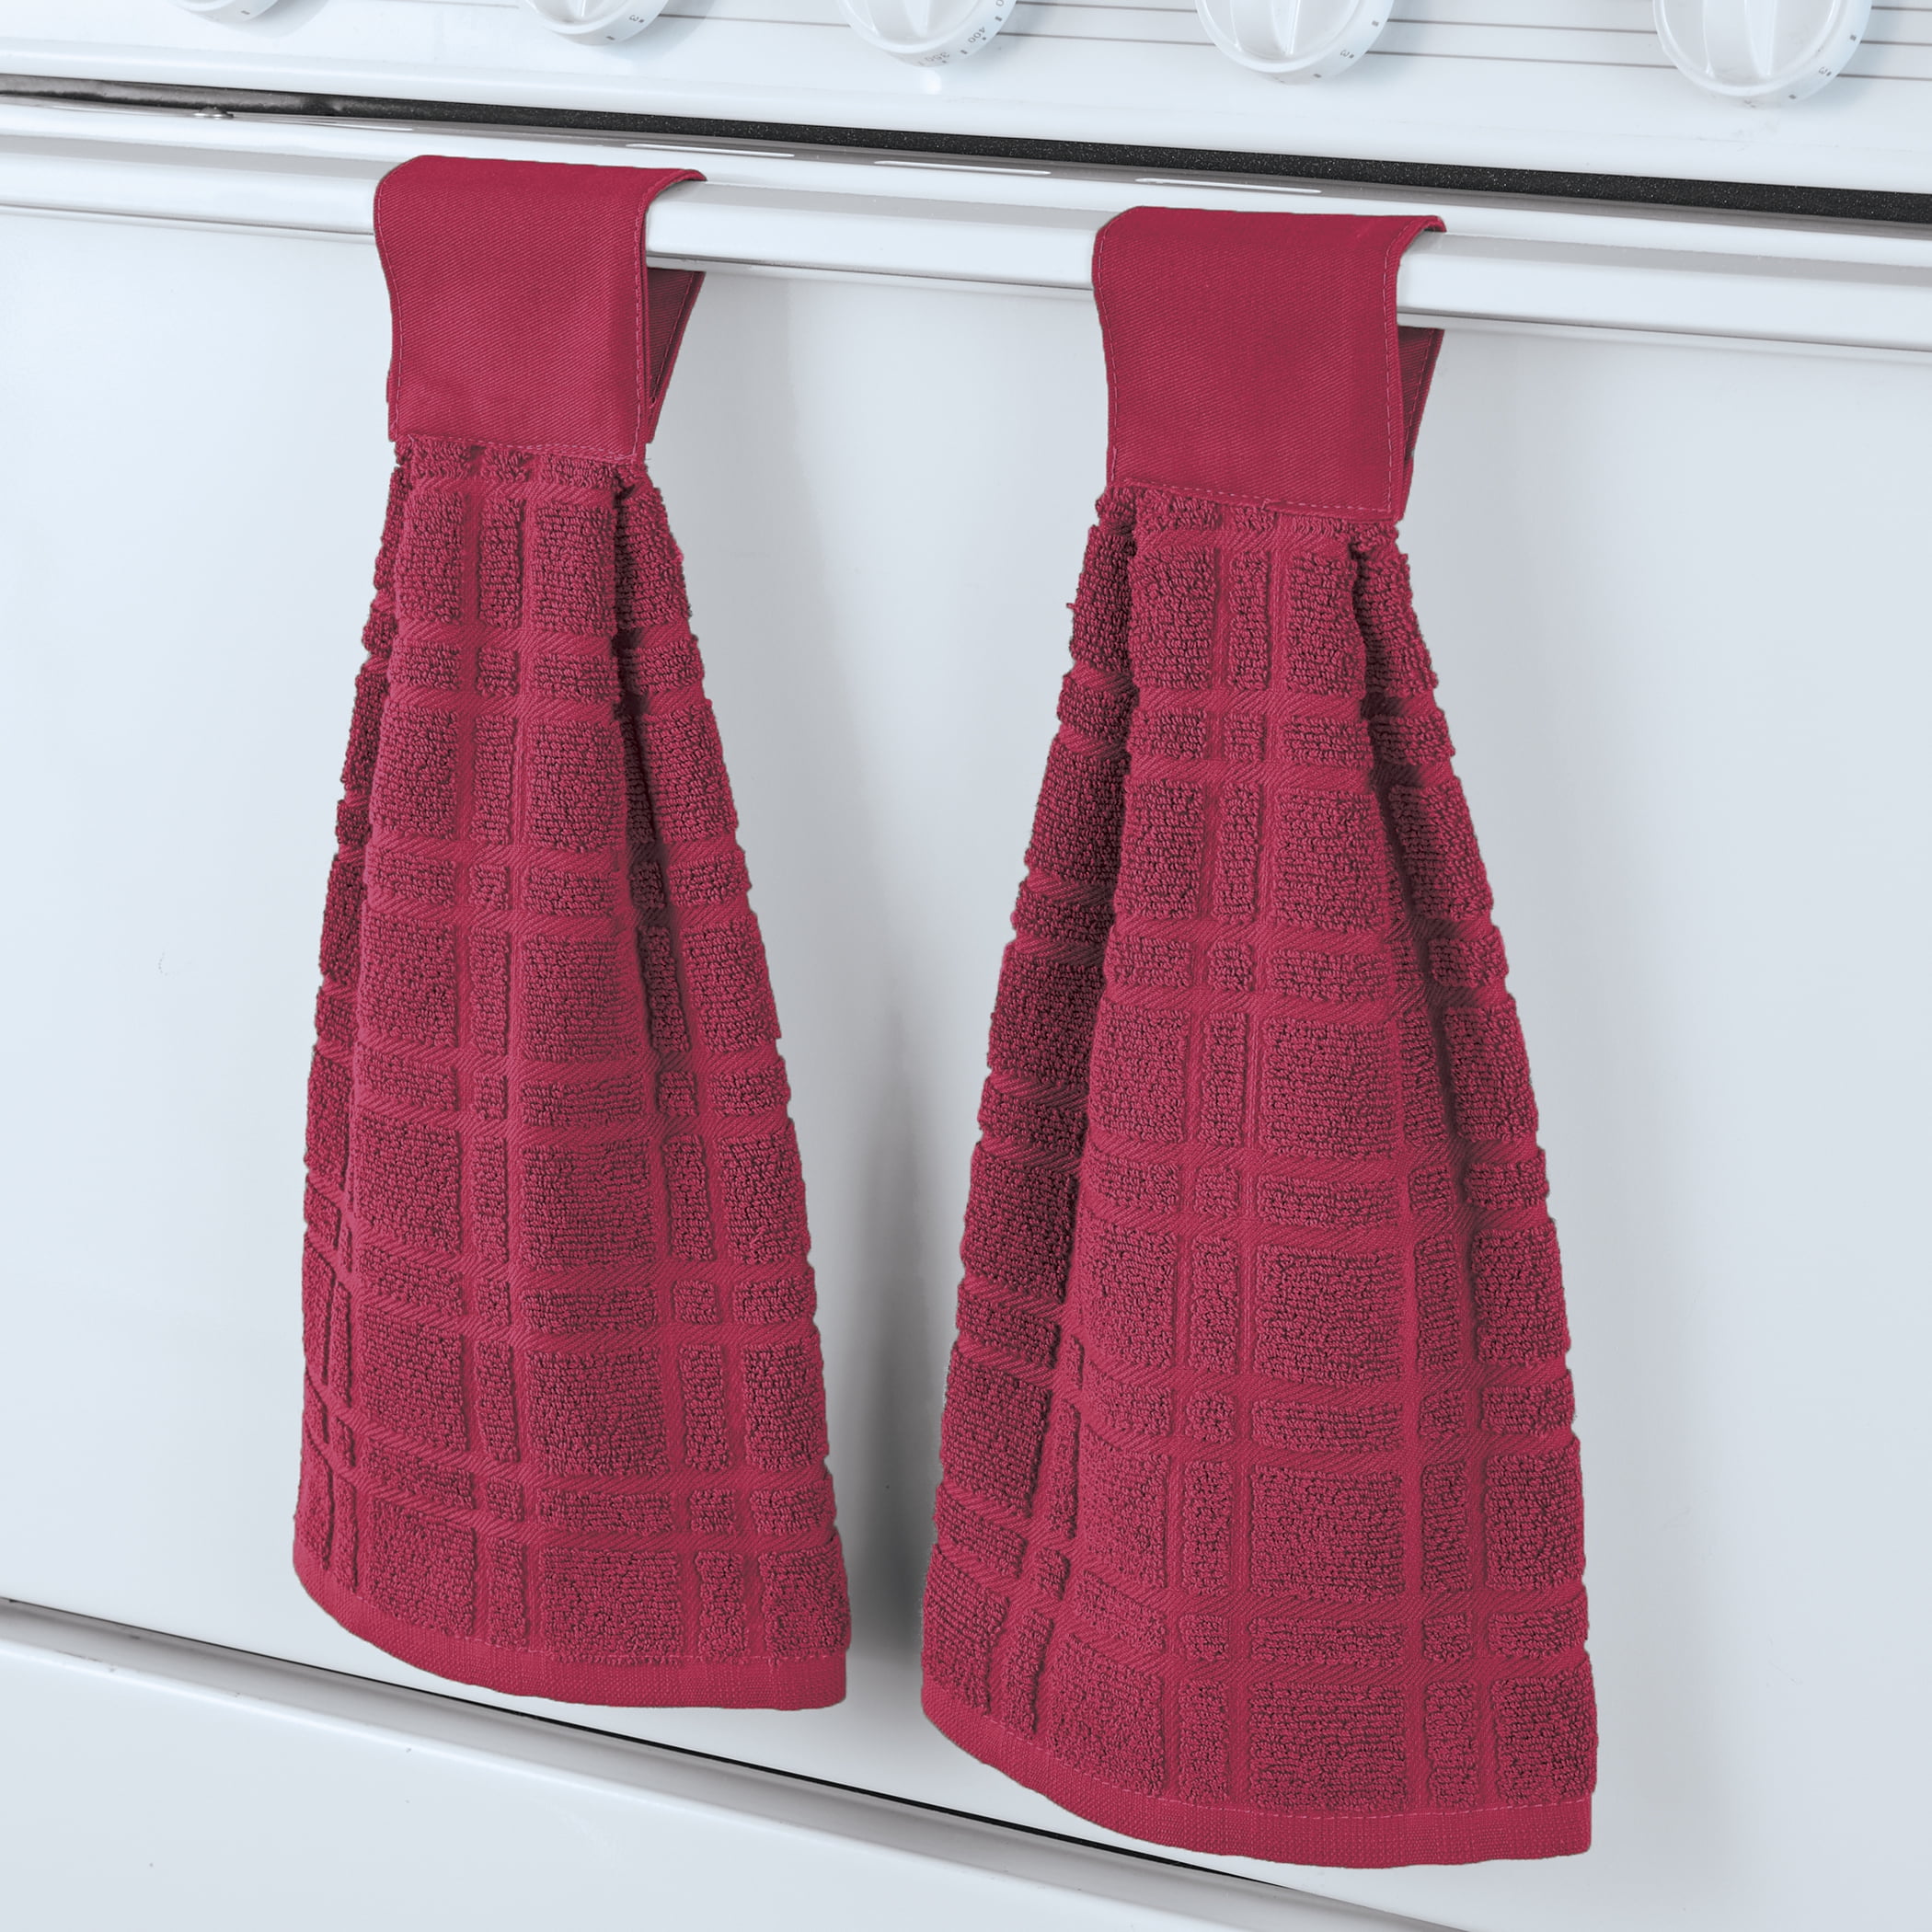 Hanging Towel, Cherry Kitchen Towel, Snap on Towel, Red Kitchen